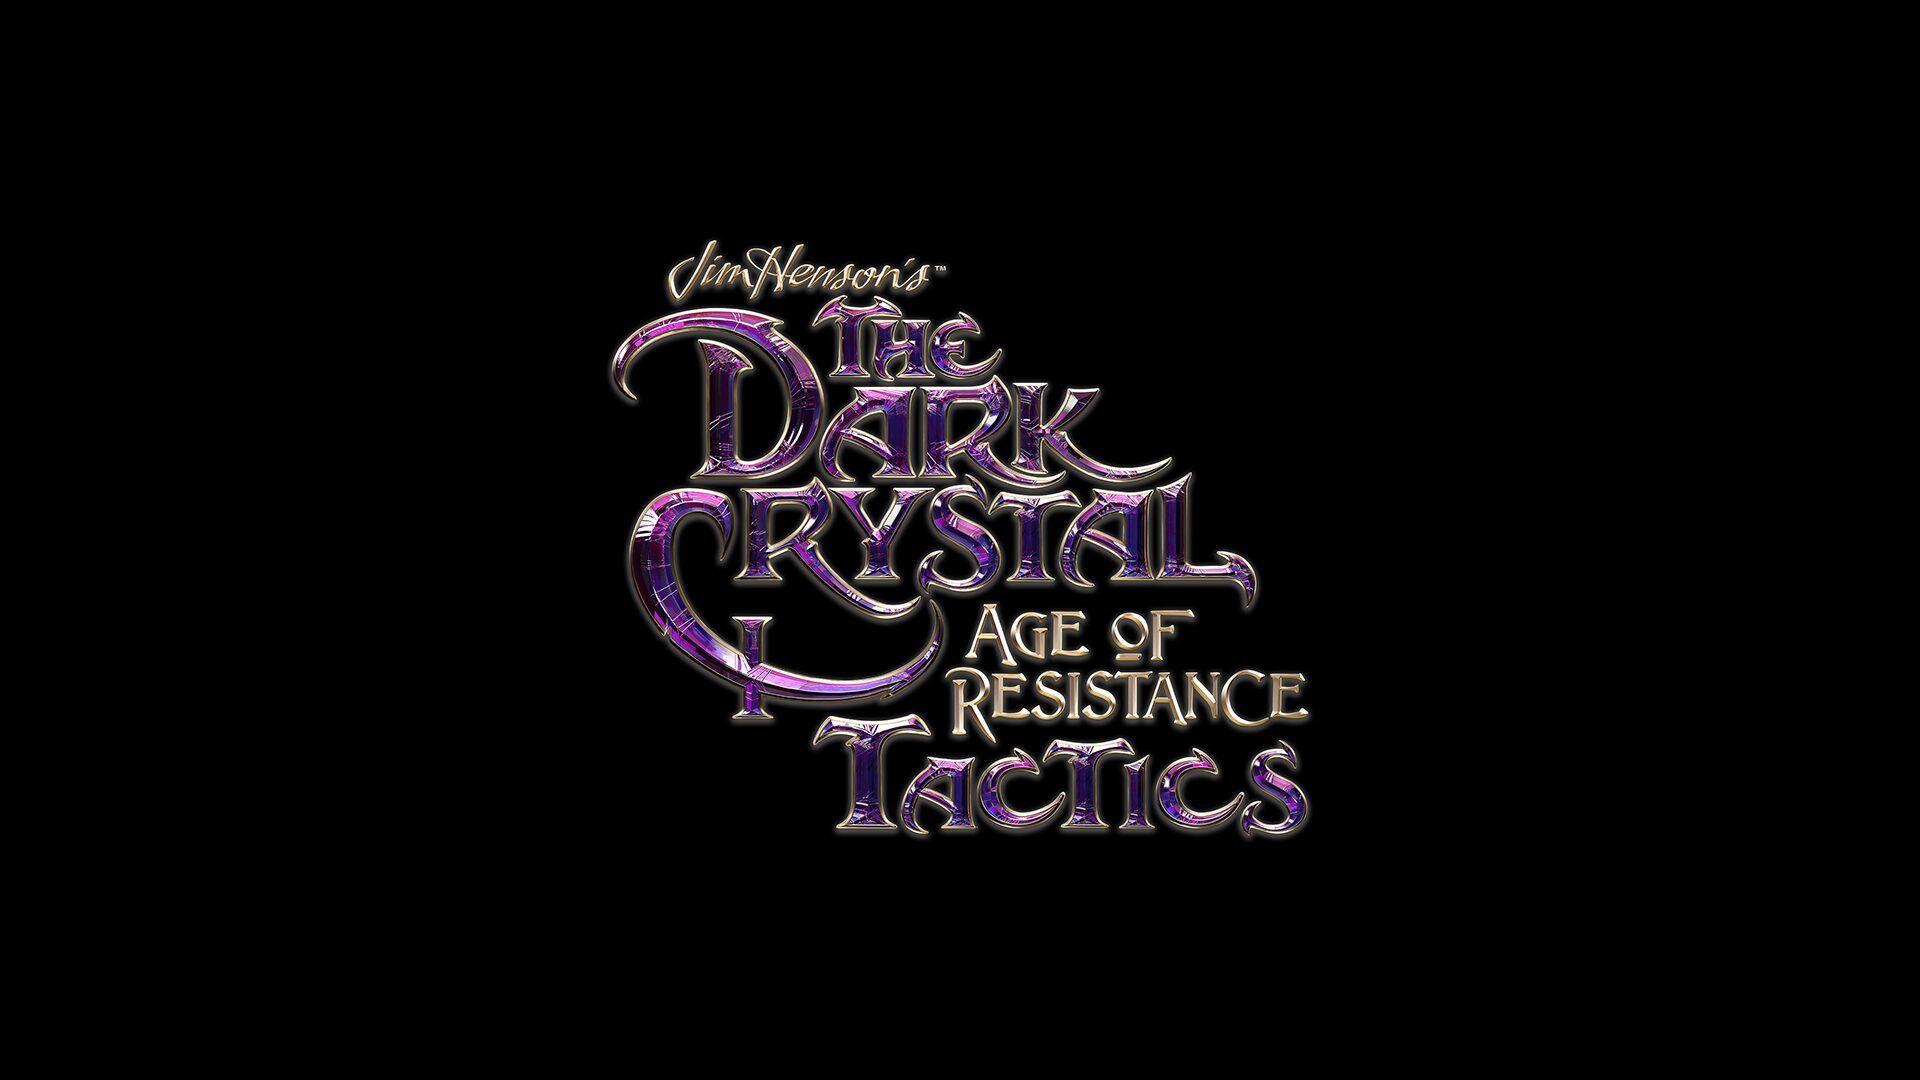 The Dark Crystal: Age of Resistance Tactics cover image